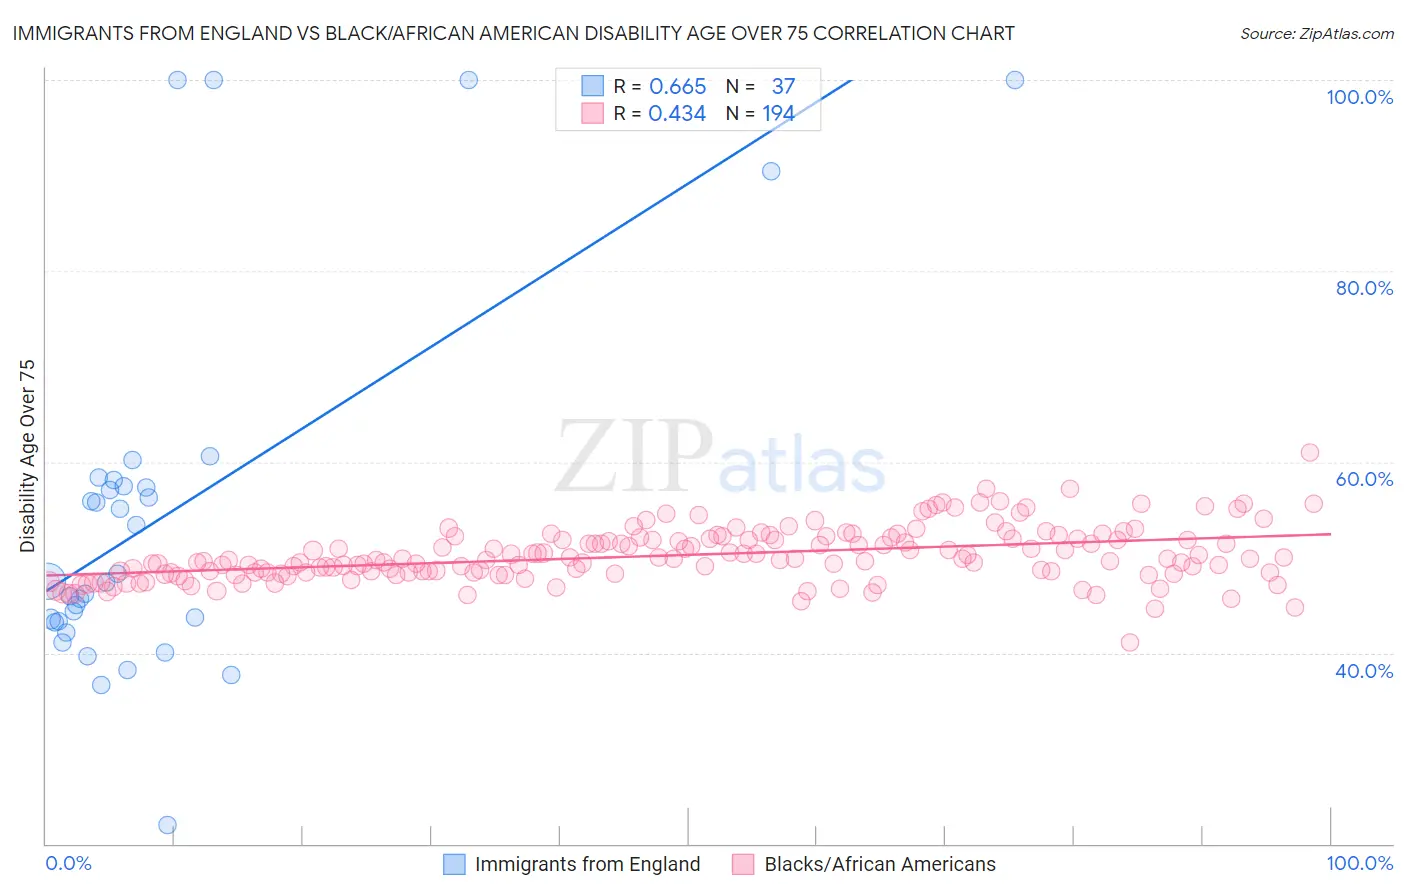 Immigrants from England vs Black/African American Disability Age Over 75